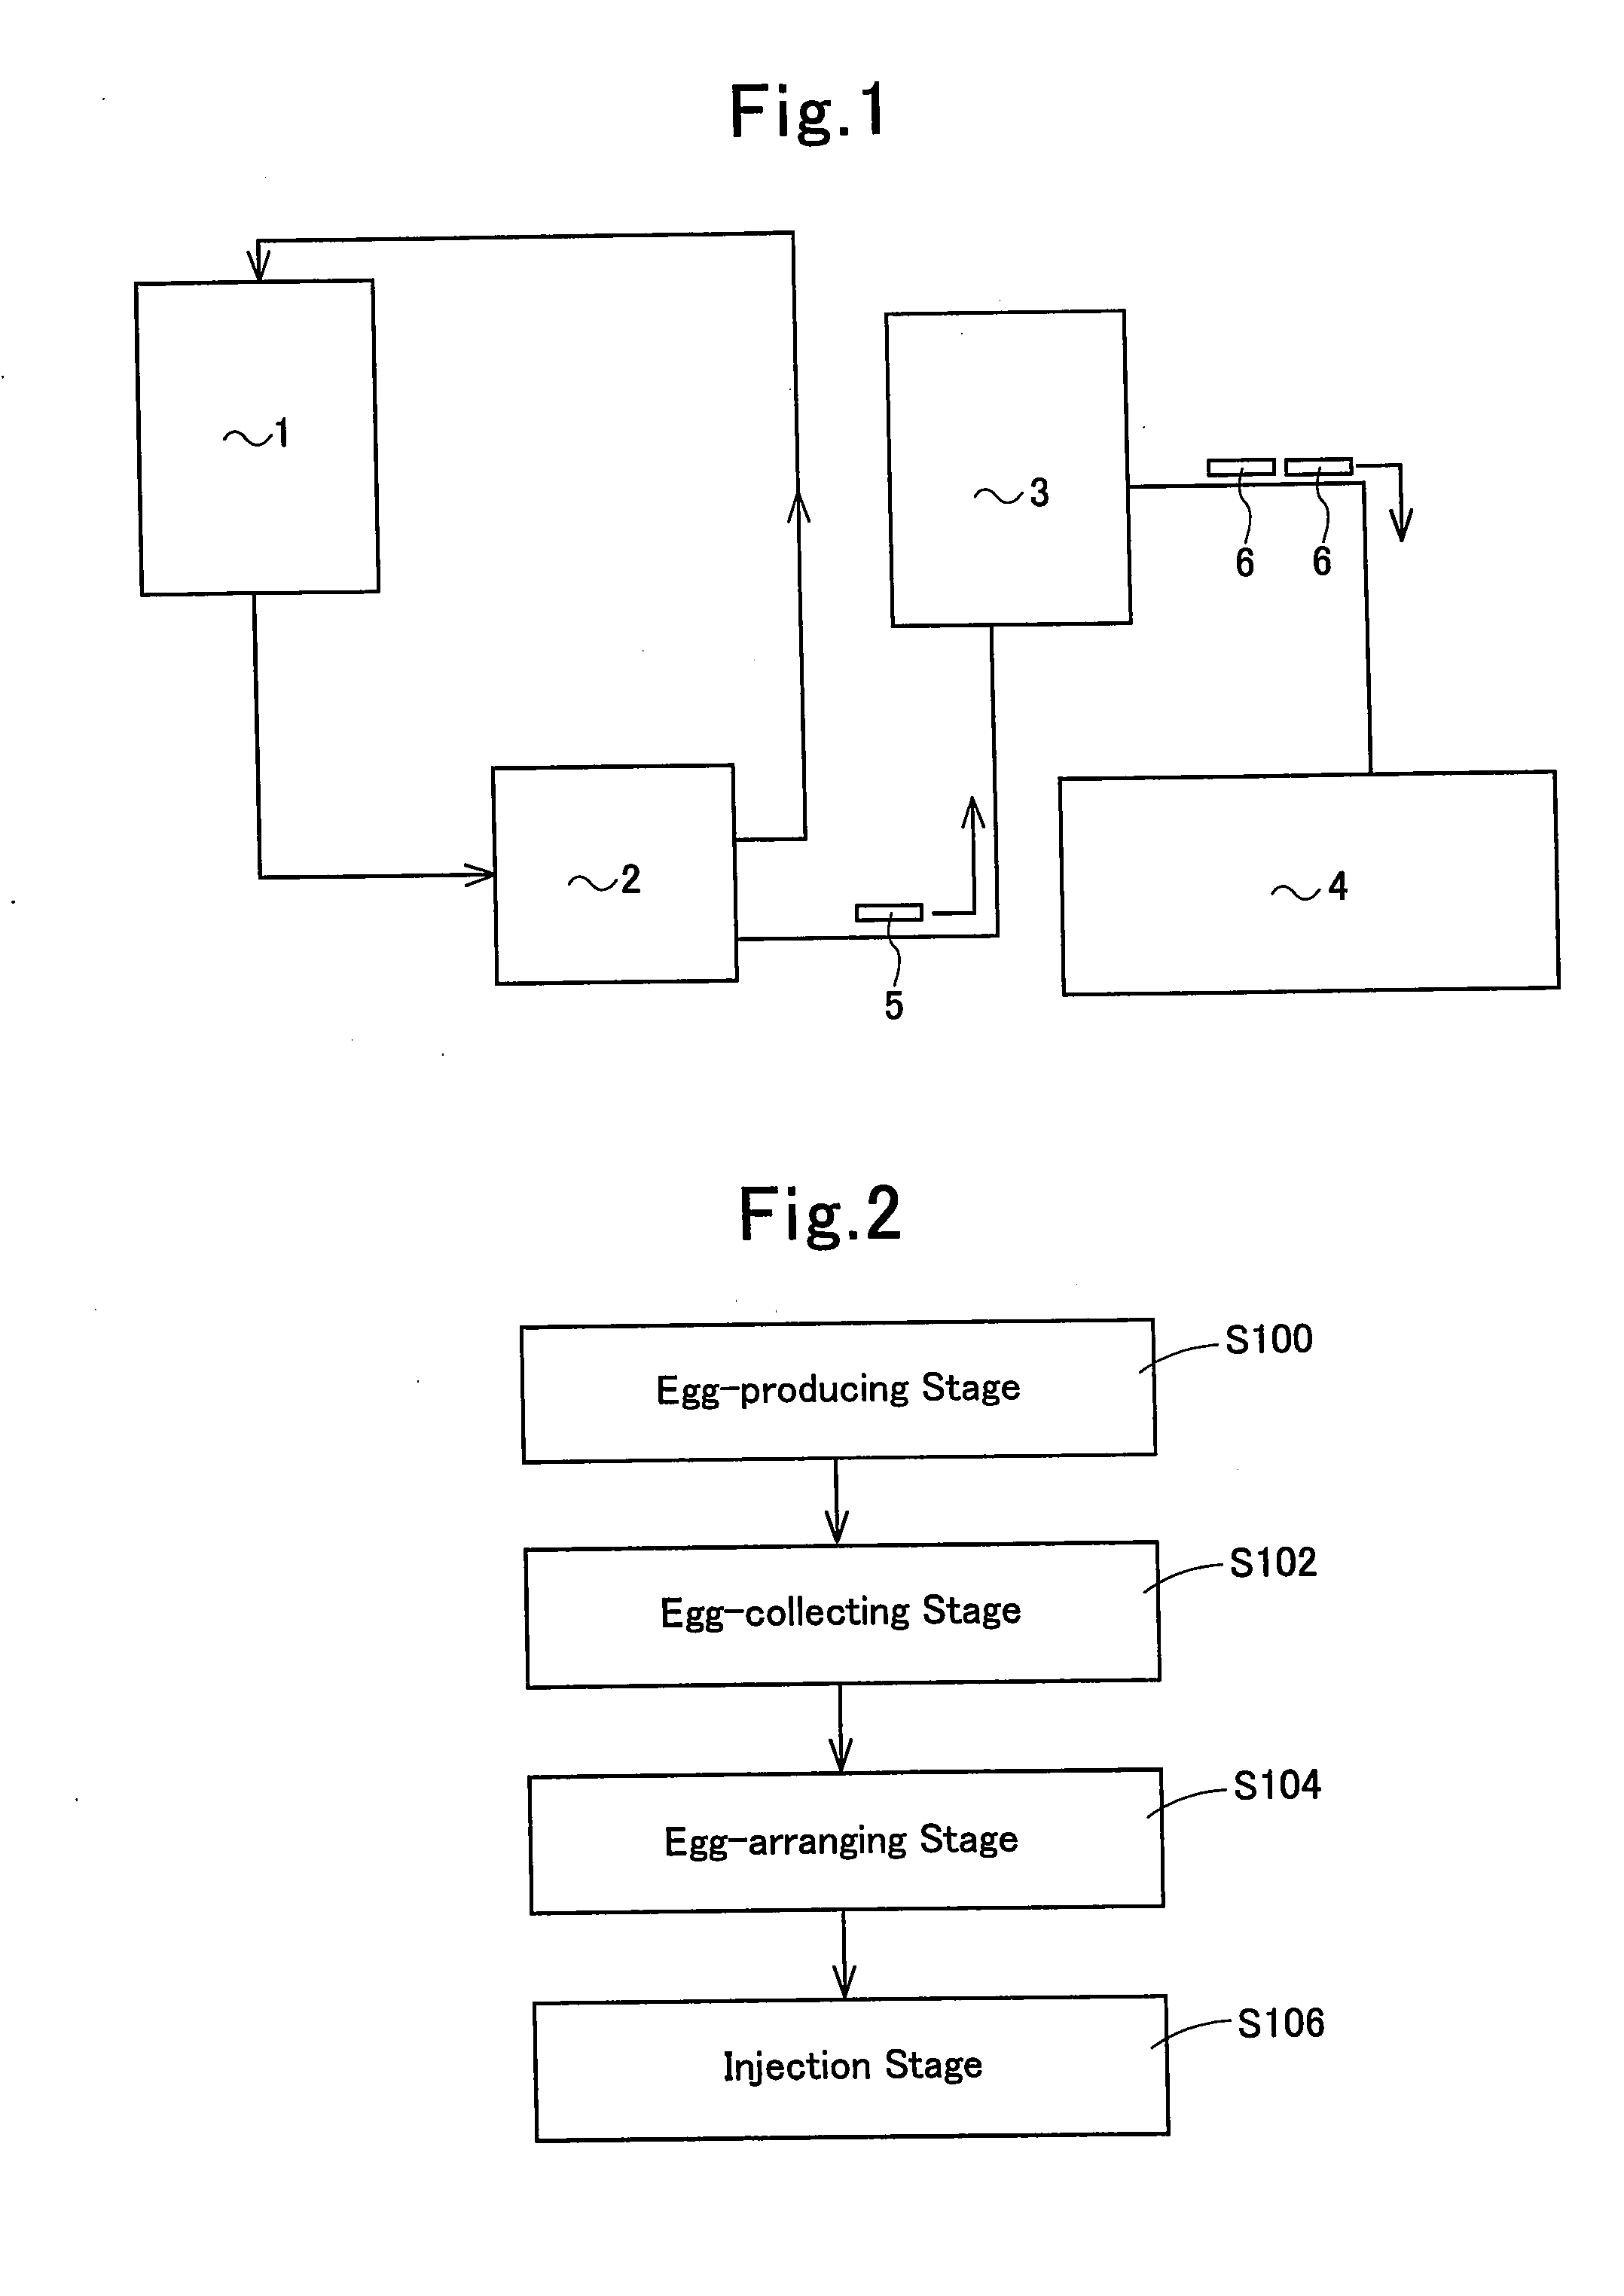 Method for processing a large number of fish eggs